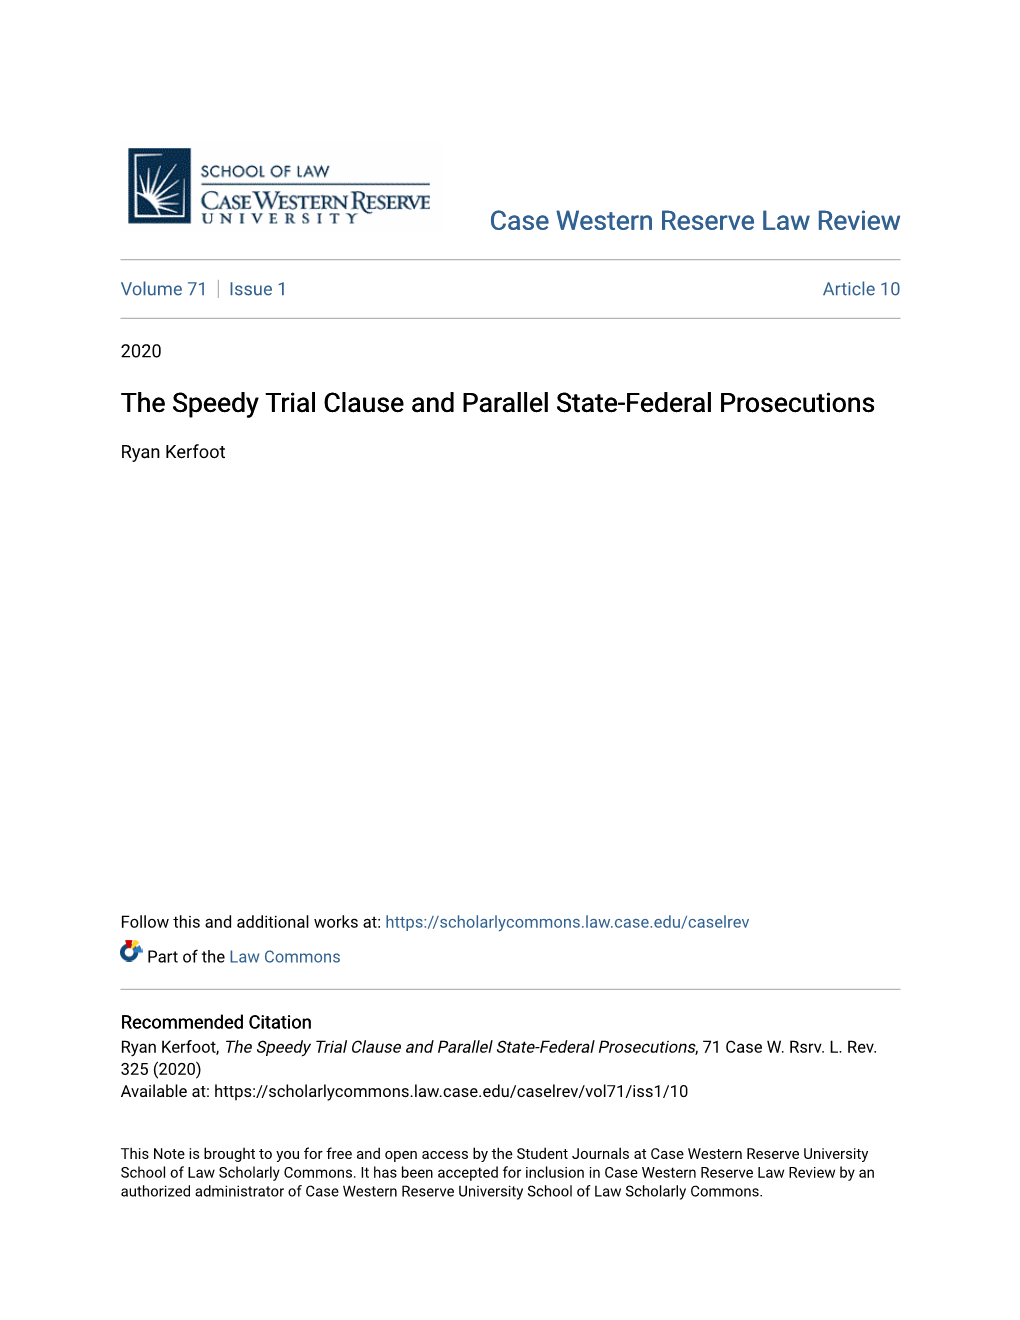 The Speedy Trial Clause and Parallel State-Federal Prosecutions